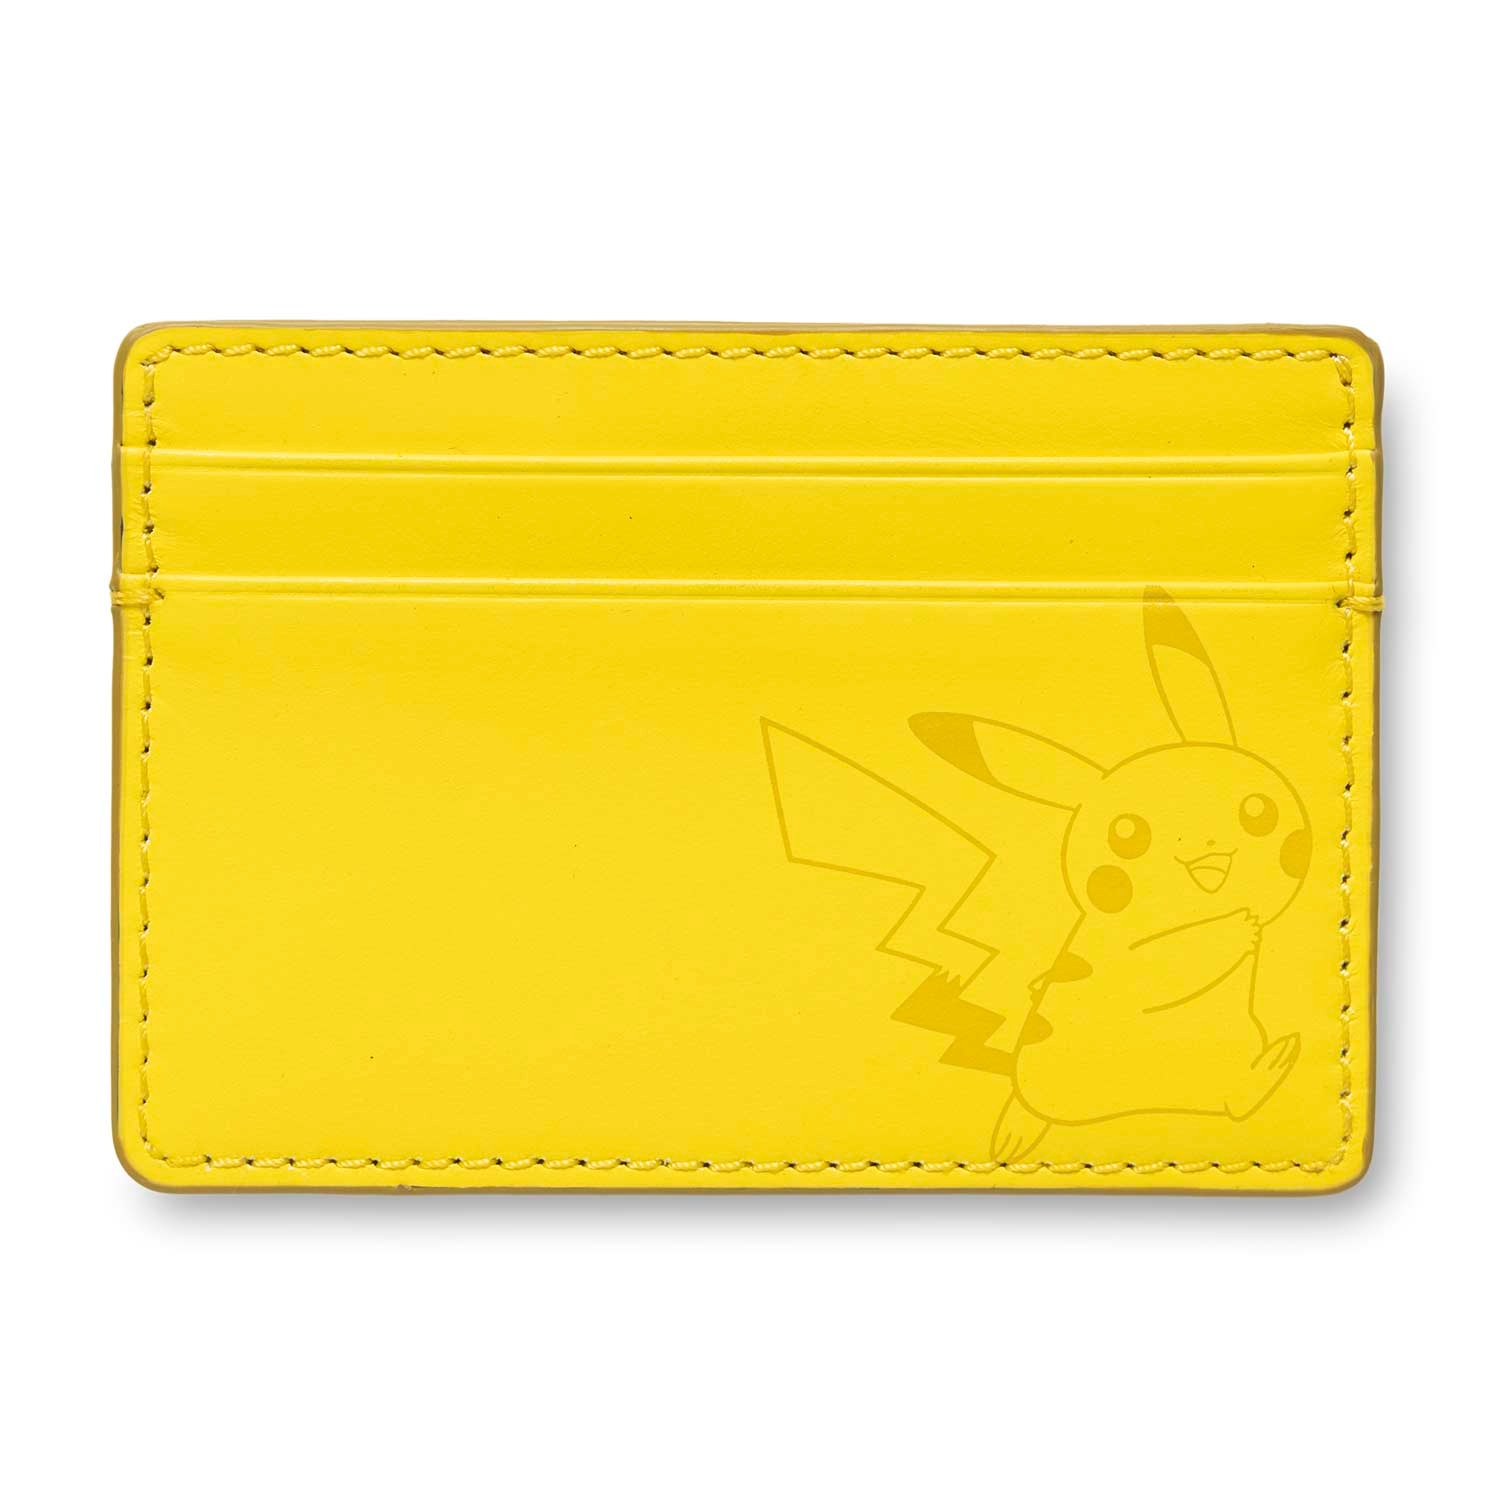 Pokémon Center, Fossil Release Exclusive Capsule Collection | License Global